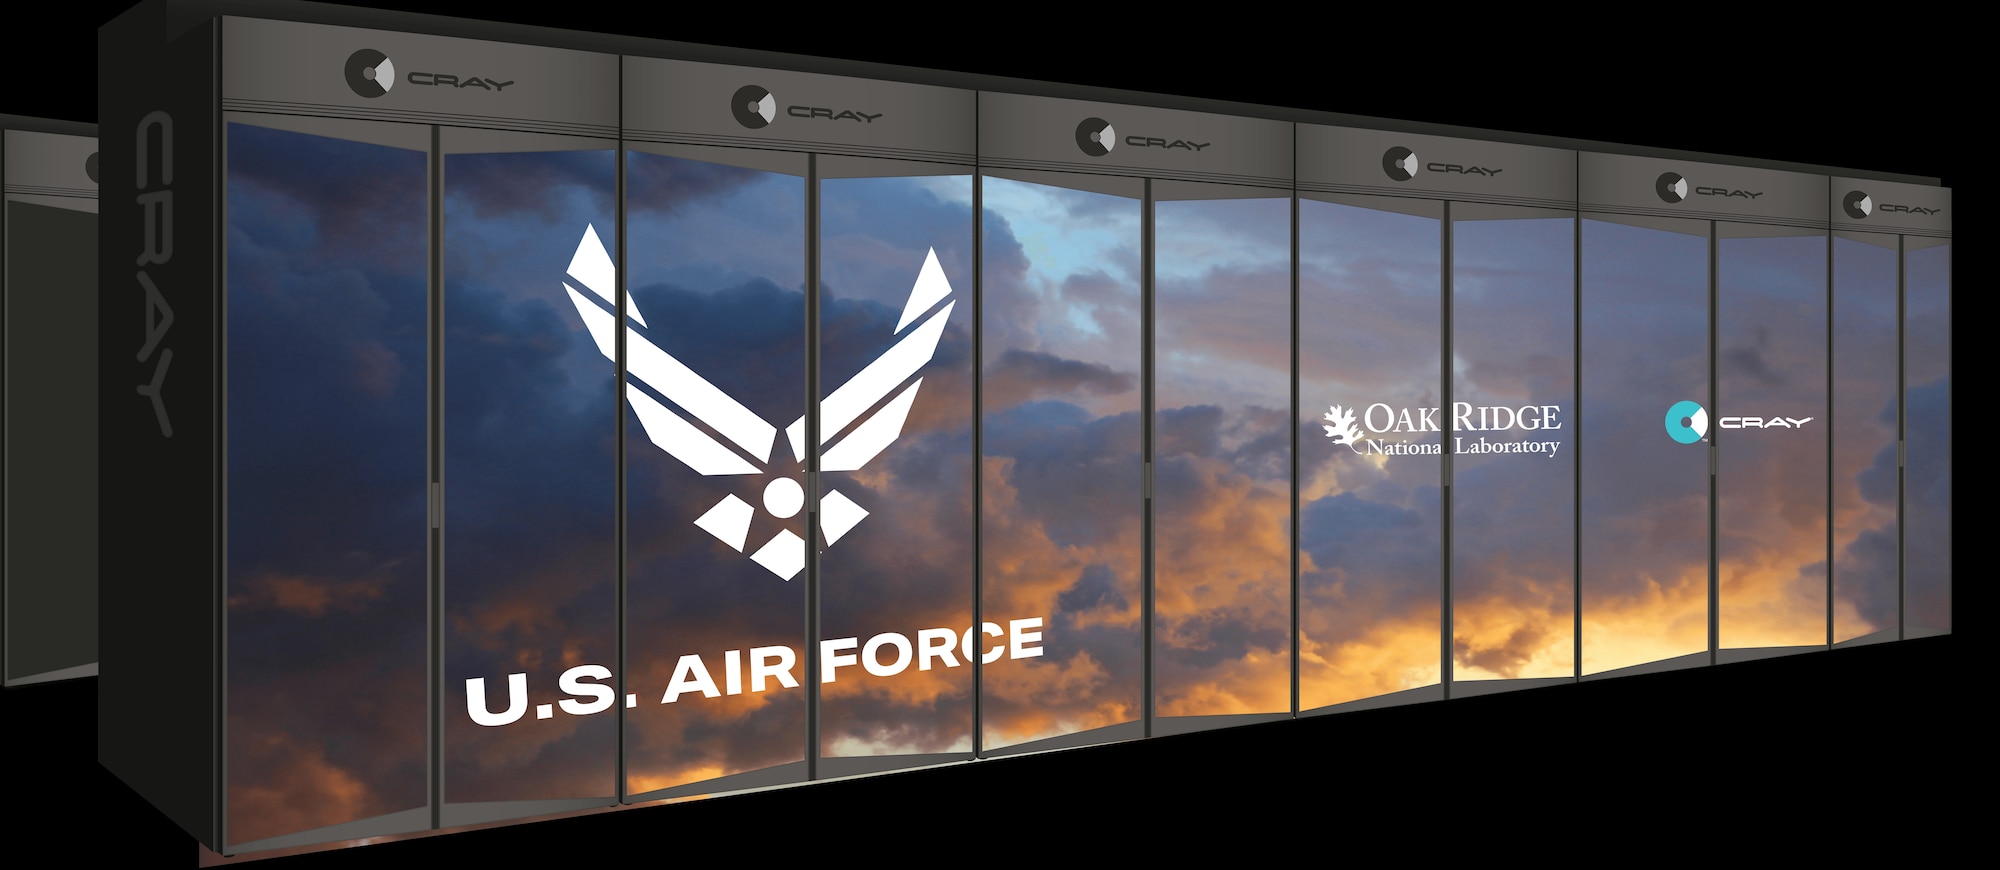 Air Force forecasts with petaflops of power